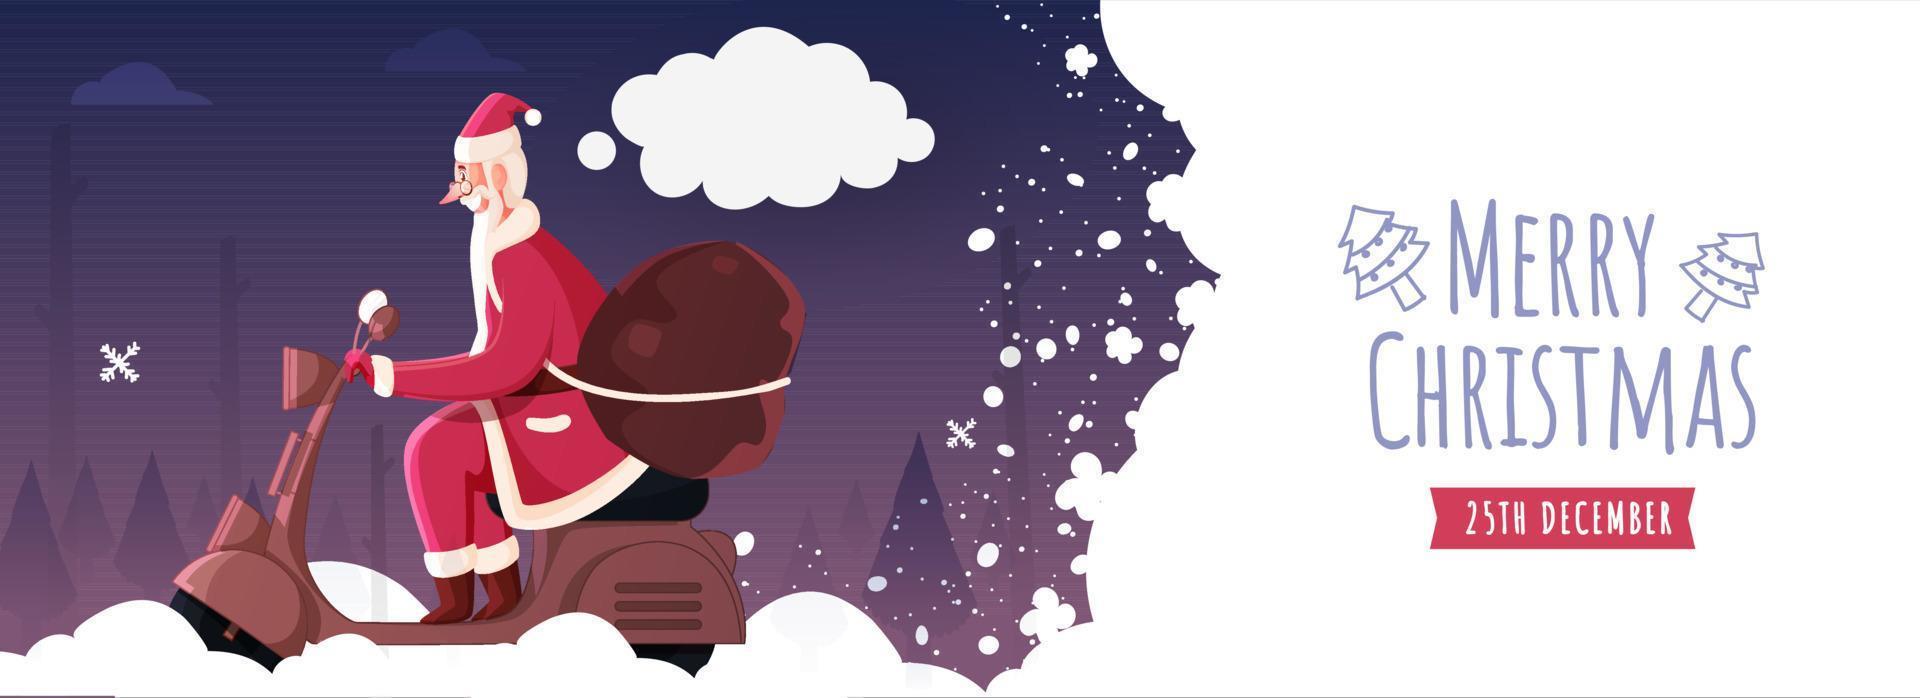 Illustration of Cheerful Santa Claus Riding Scooter with Heavy Bag on Snowy Landscape Background for Merry Christmas Celebration. Header or Banner Design. vector